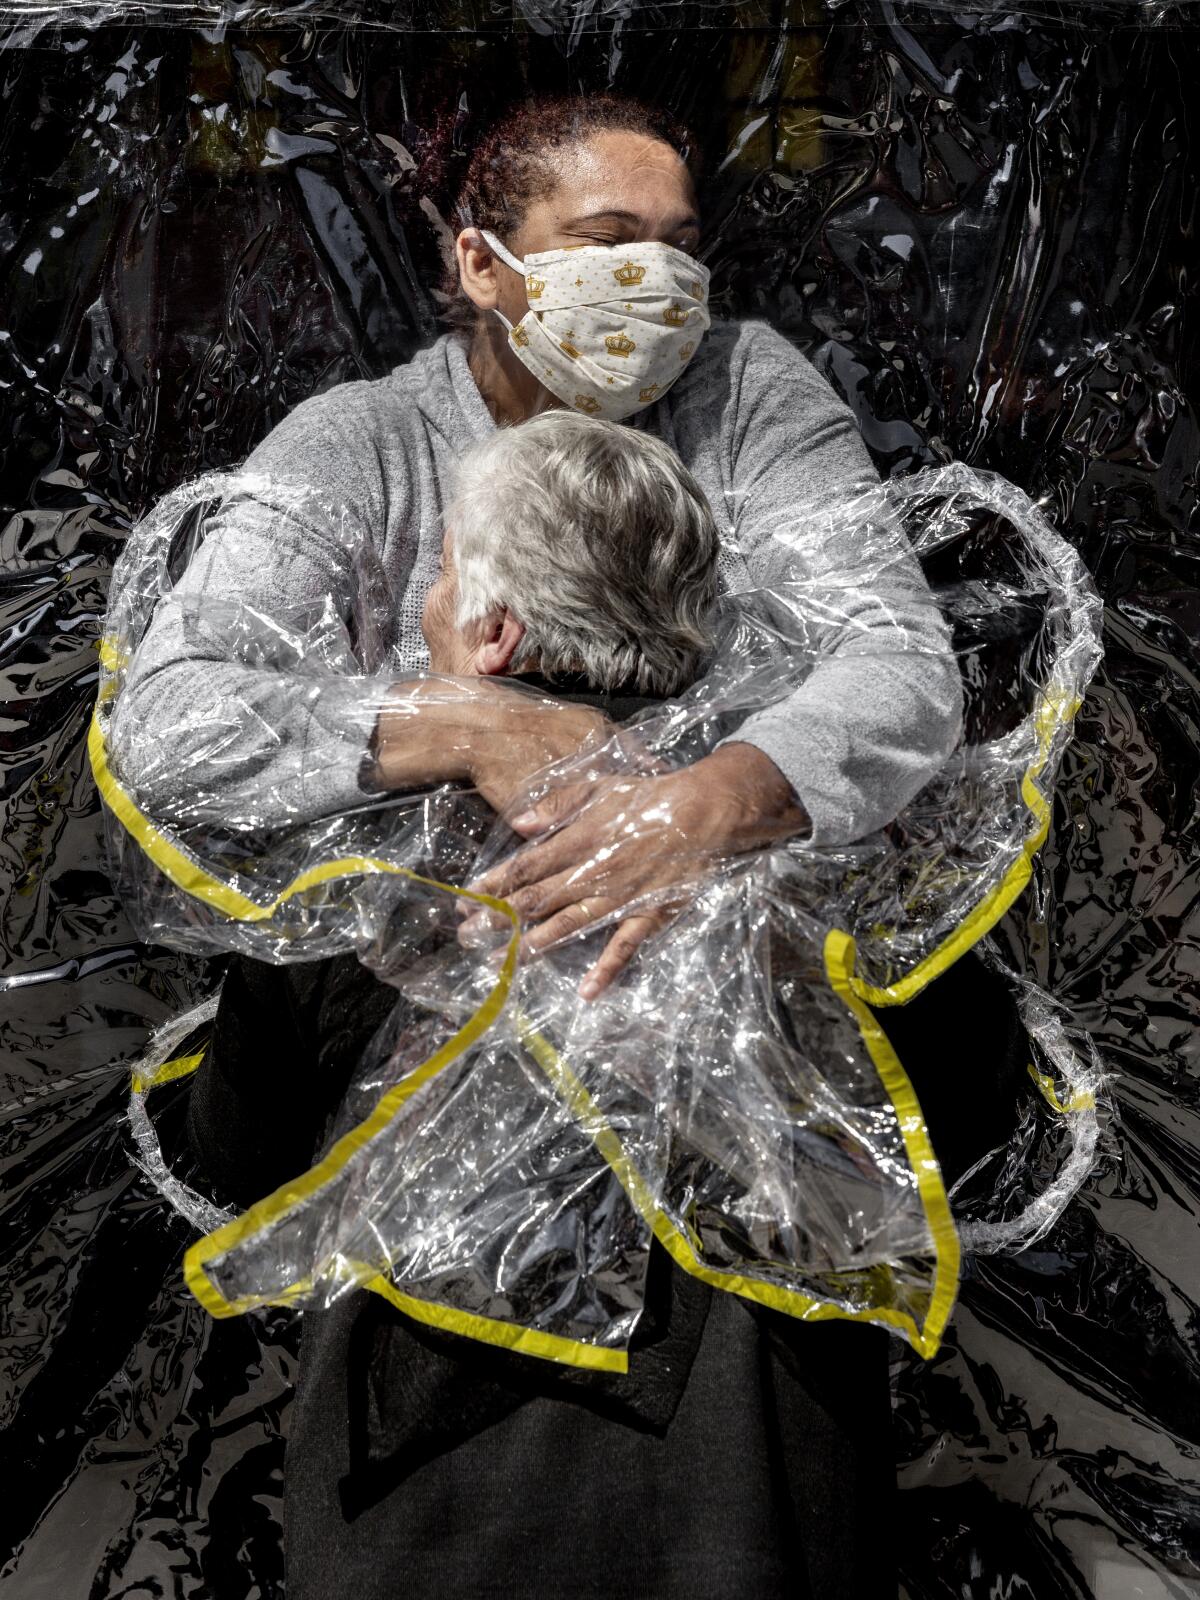 In this image released by World Press Photo, Thursday April 15, 2021, by Mads Nissen, Politiken, Panos Pictures, which won the World Press Photo of the Year award, and the first prize in the General News Singles category, titled The First Embrace, shows Rosa Luzia Lunardi (85) embraced by nurse Adriana Silva da Costa Souza, at Viva Bem care home, Sao Paulo, Brazil, on August 5, 2020. (Mads Nissen, Politiken, Panos Pictures, World Press Photo via AP)